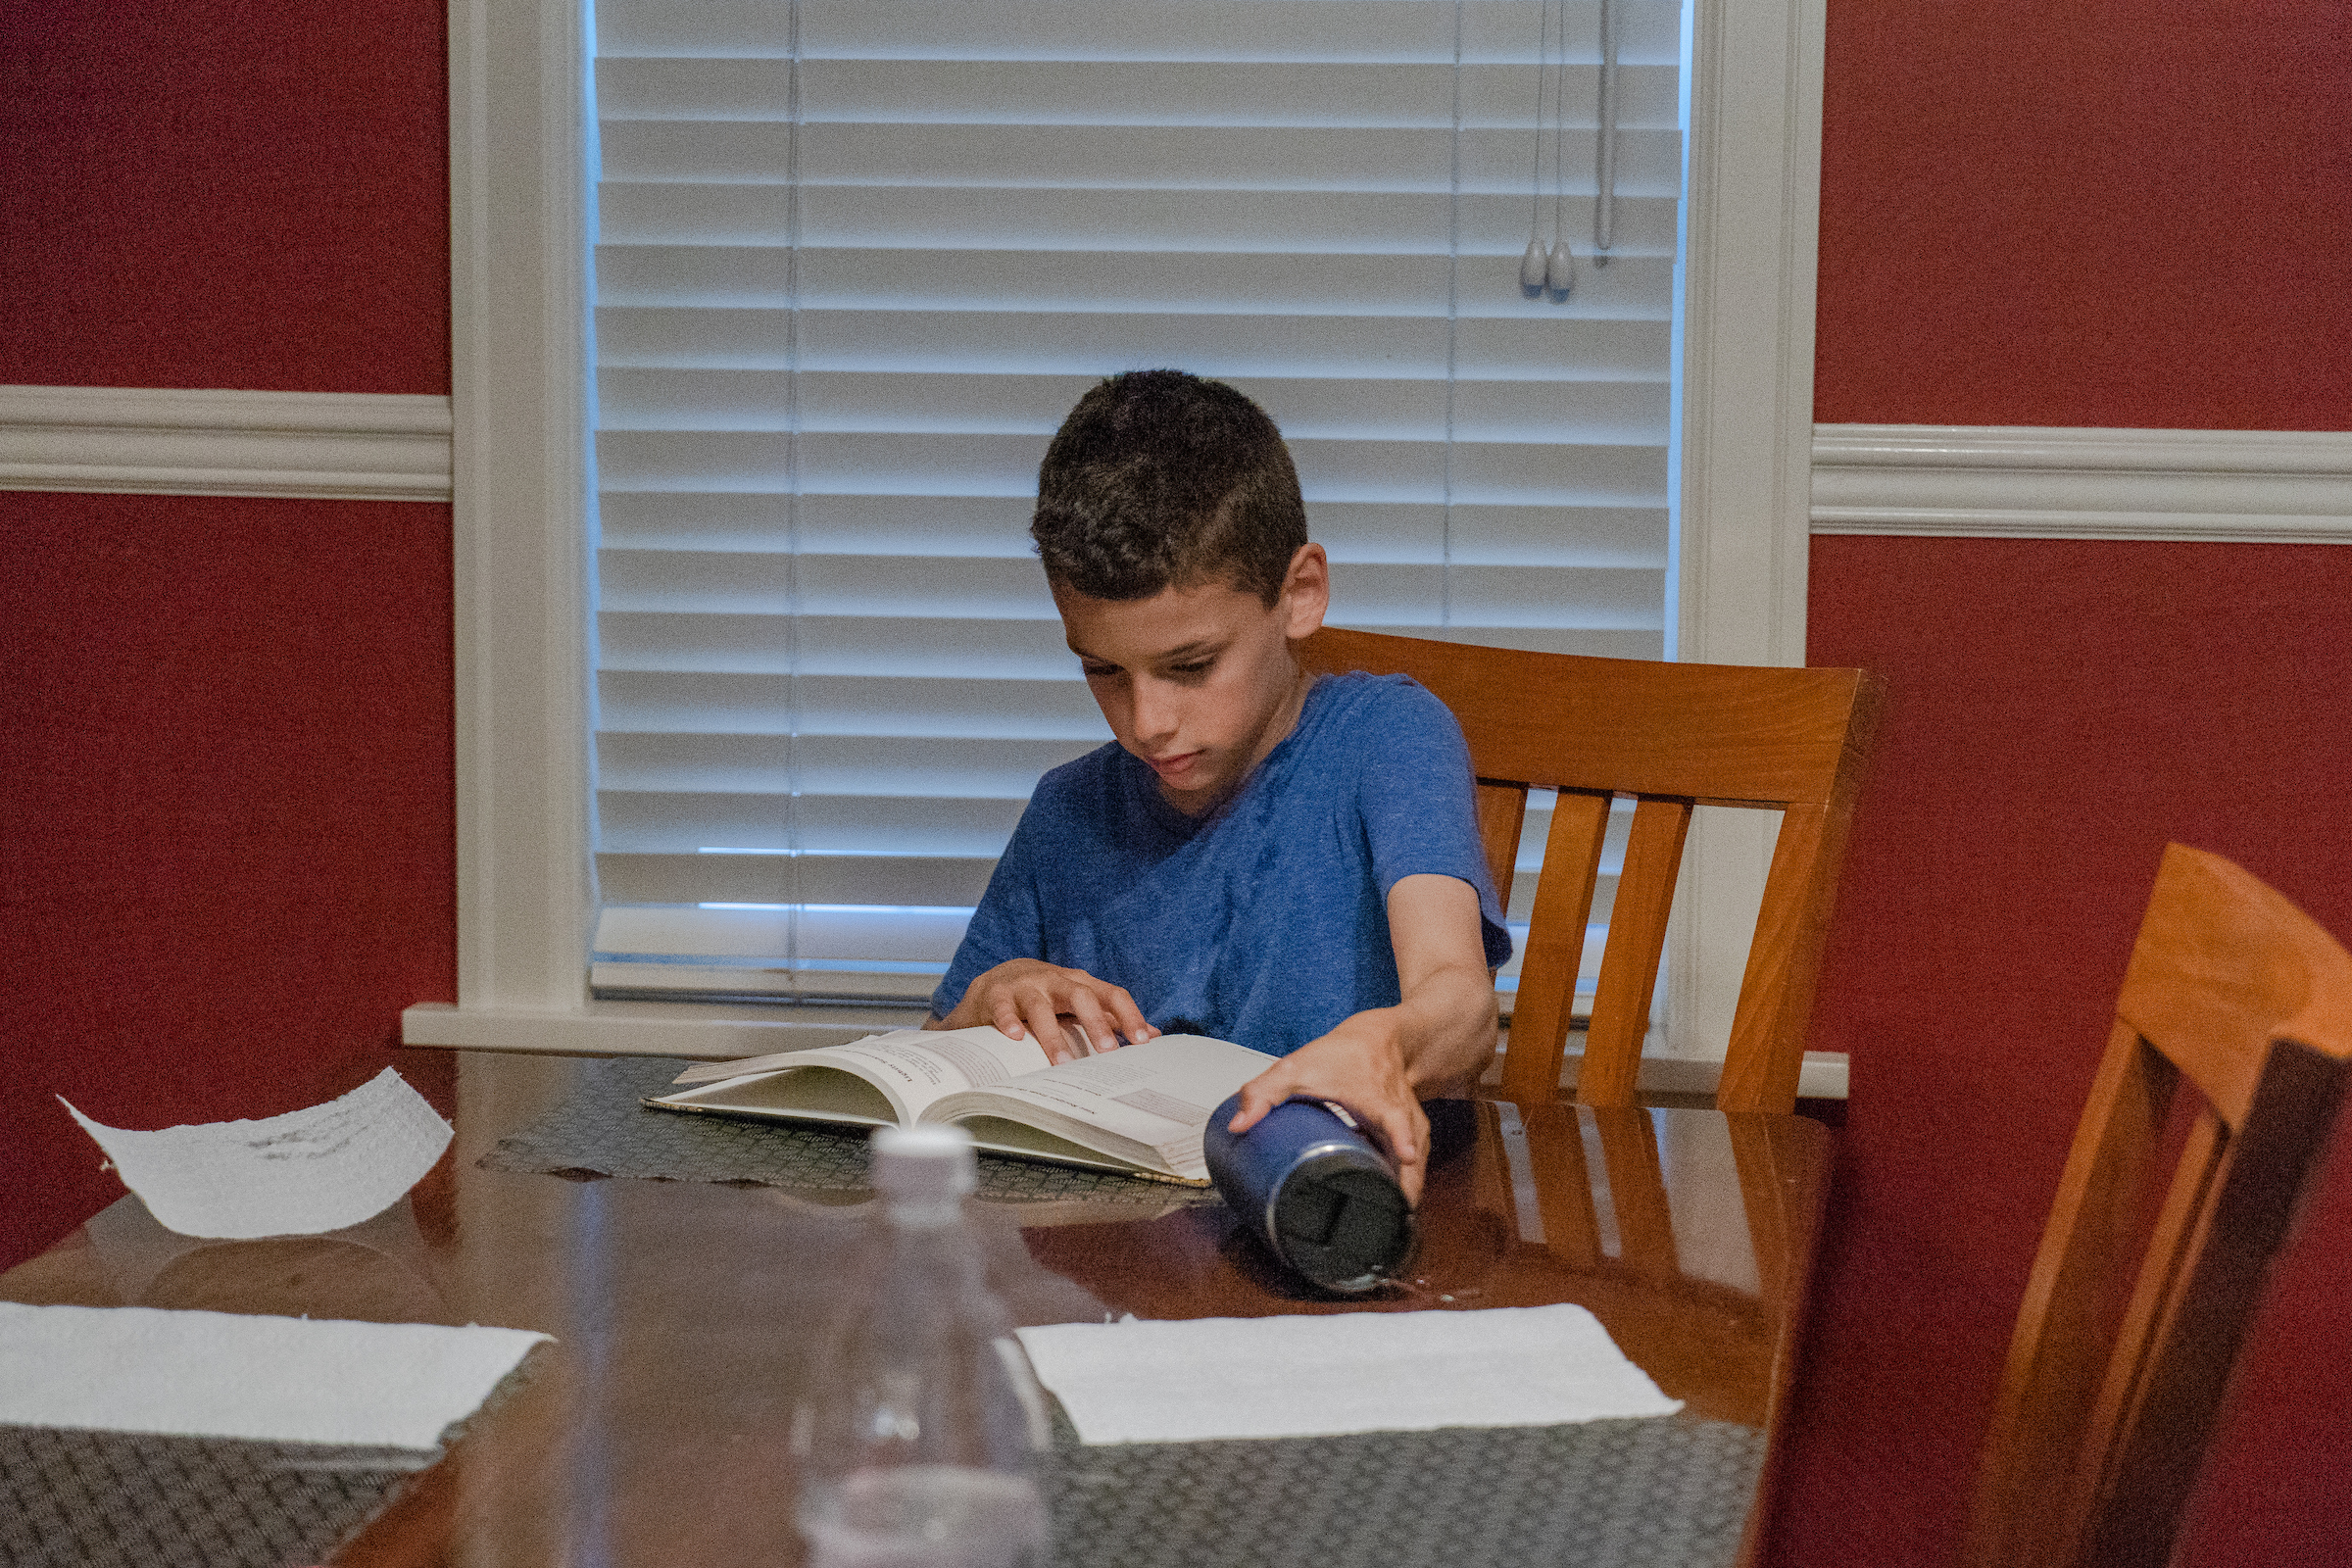 Kienan Ellis, 10, reads before dinner at his family's home in Seattle.